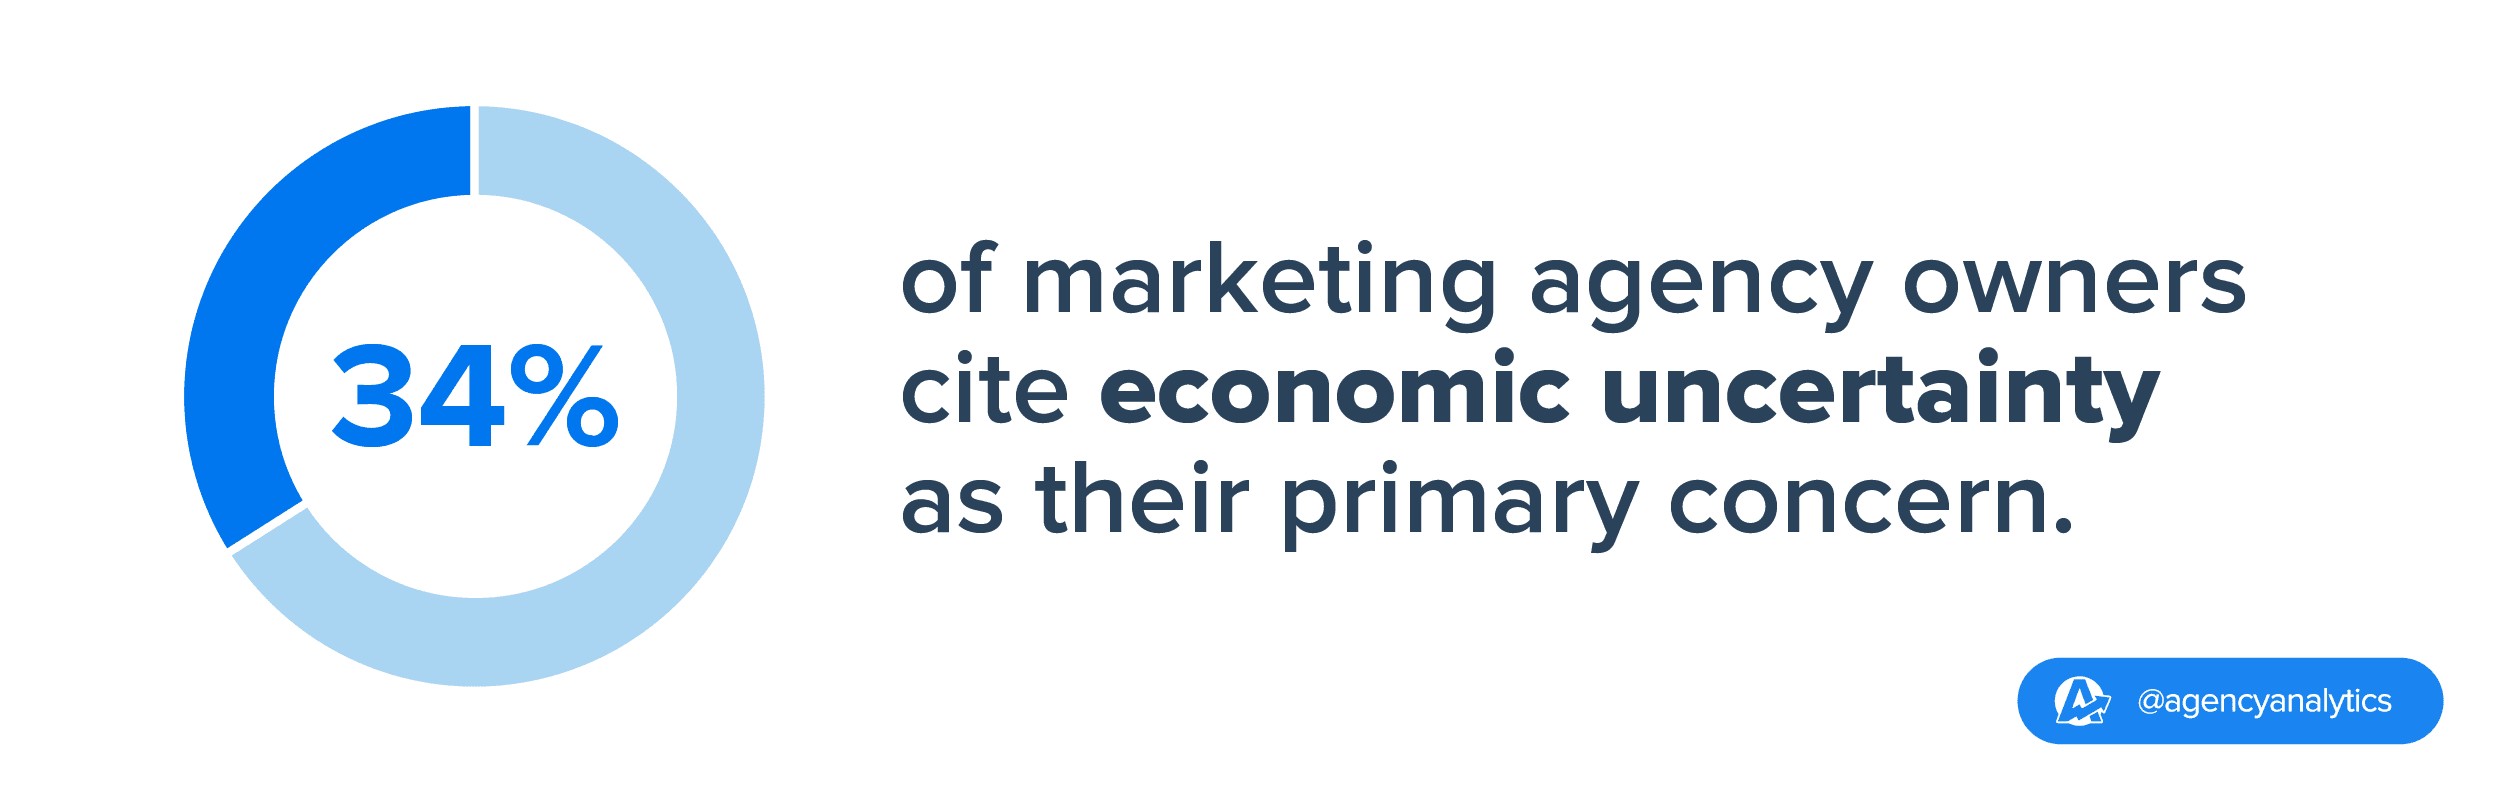 34% of marketing agency owners are concerned about economic uncertainty